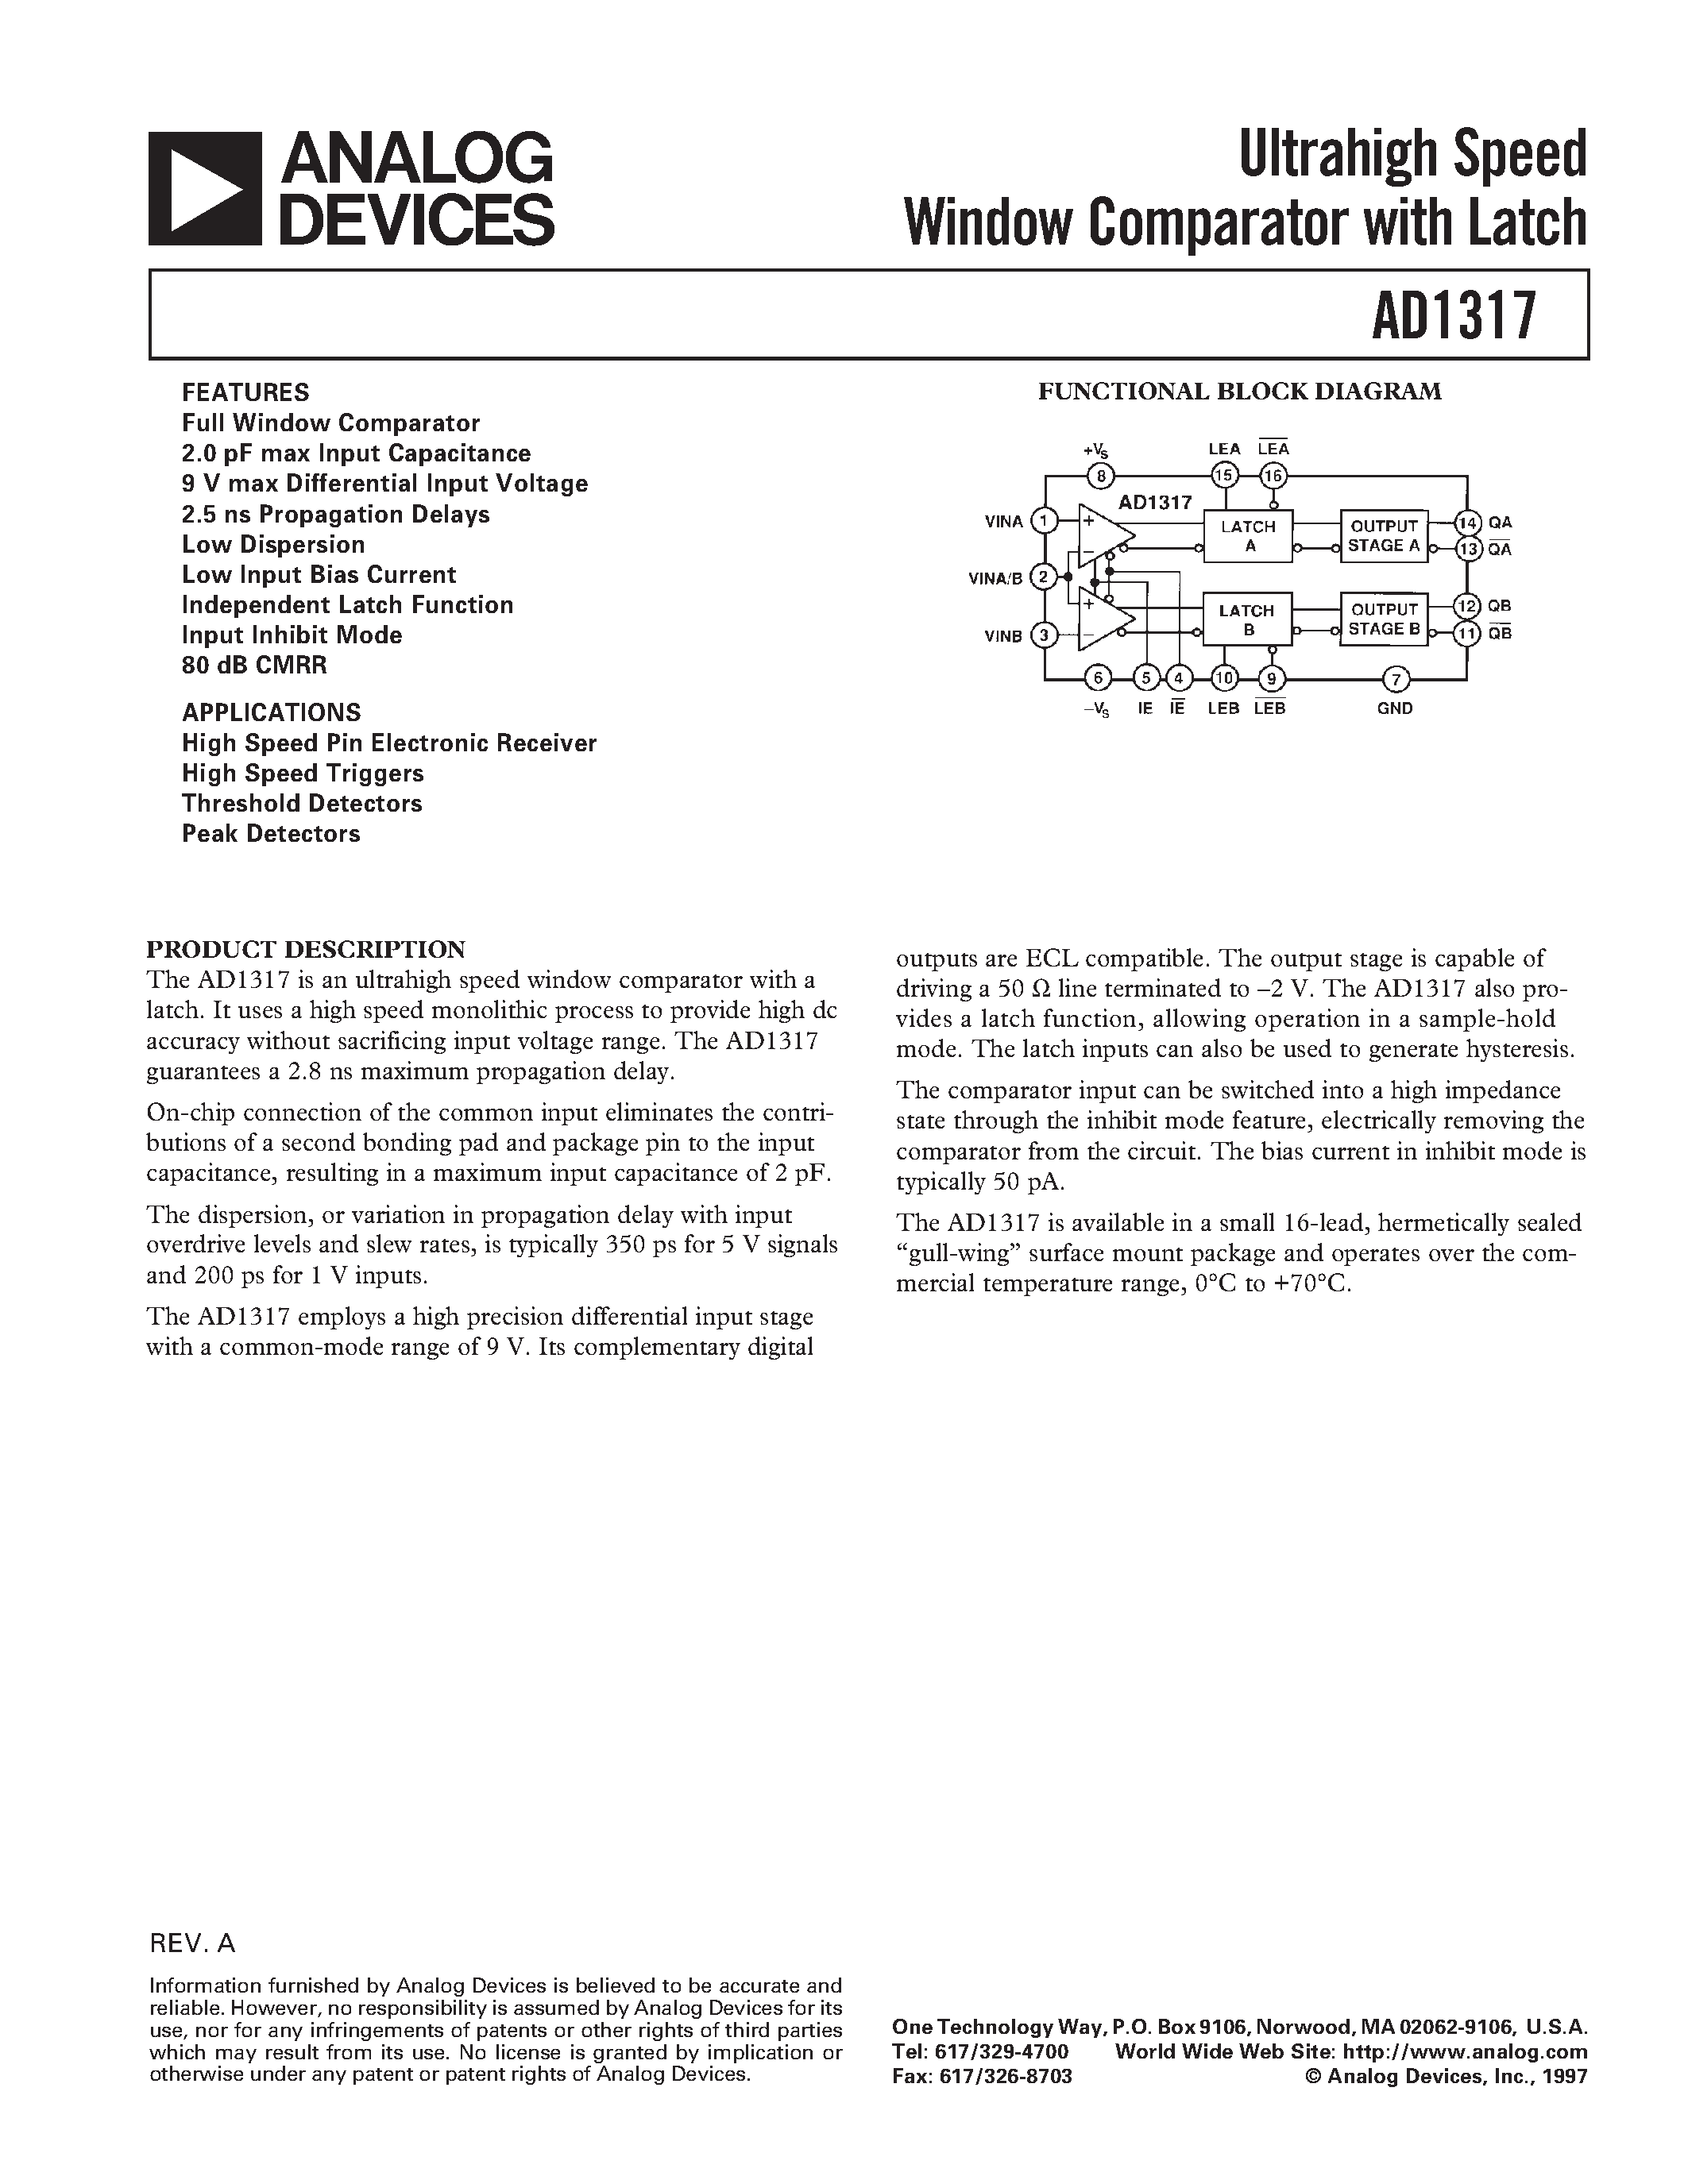 Datasheet AD1317 - Ultrahigh Speed Window Comparator with Latch page 1